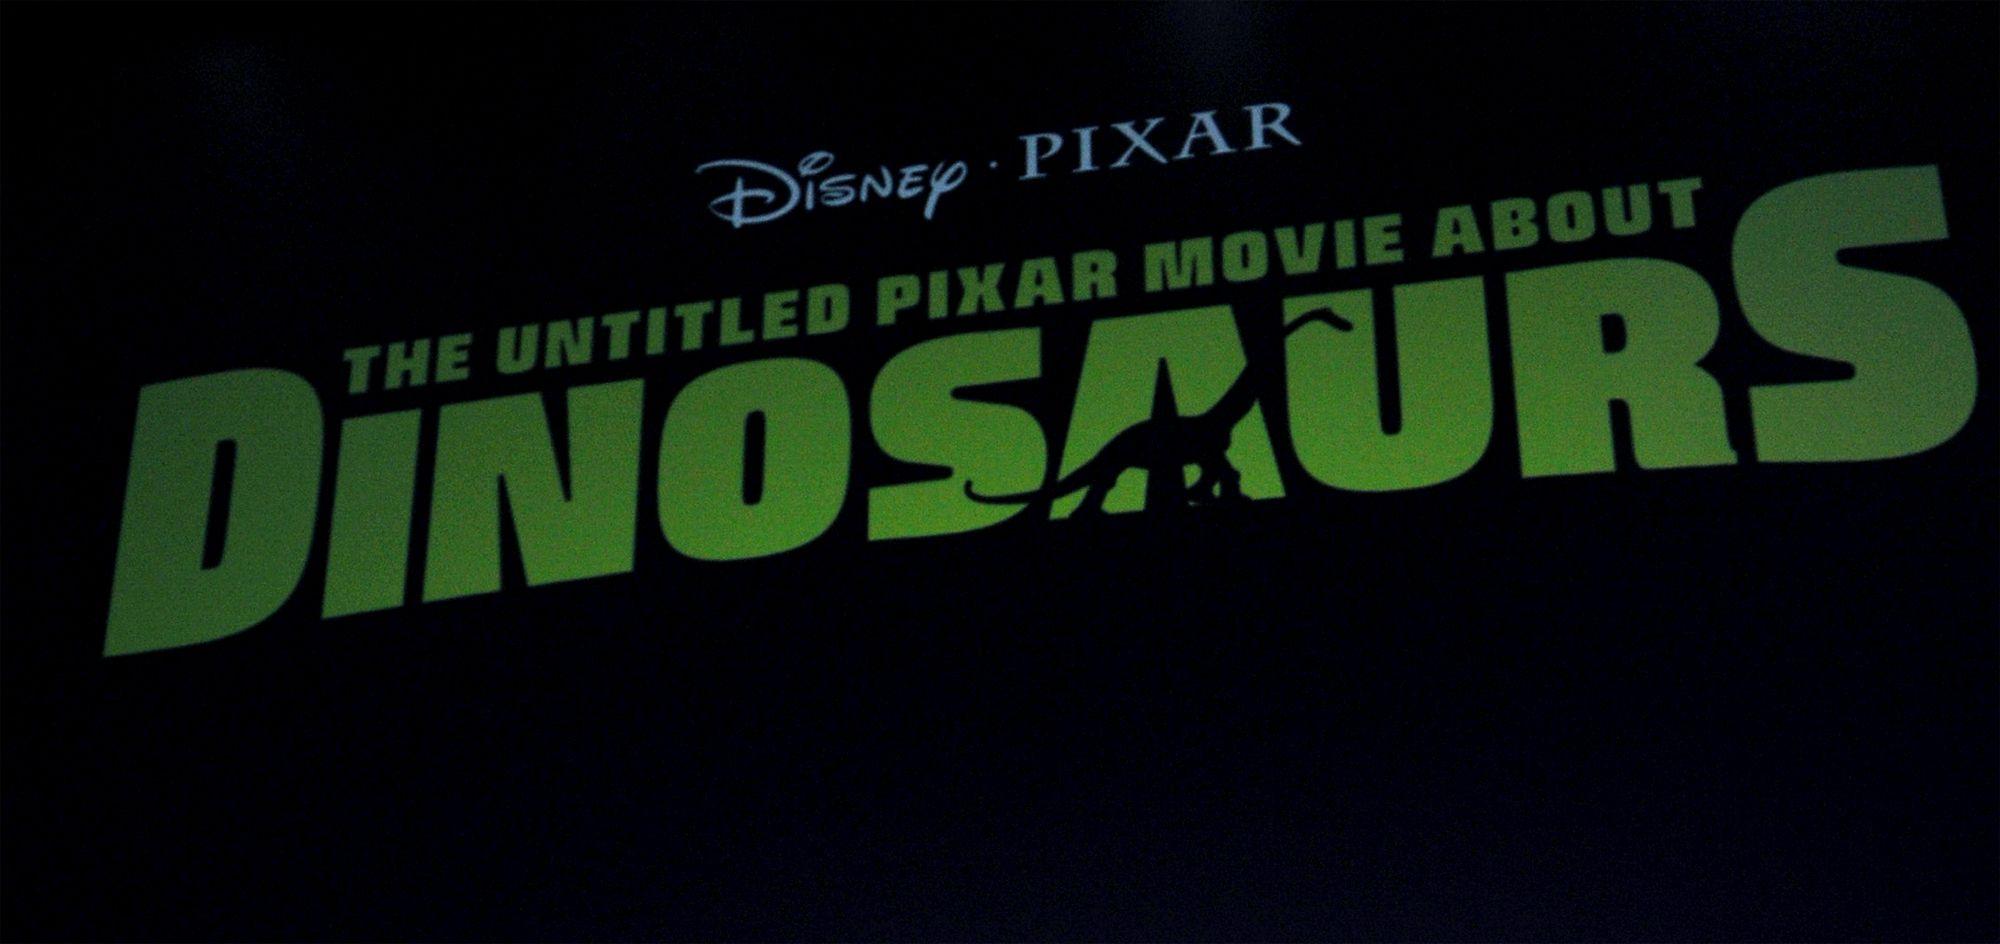 Pixar Movie Logo - LOL: See the Temp Logo For 'The Untitled Pixar Movie About Dinosaurs ...